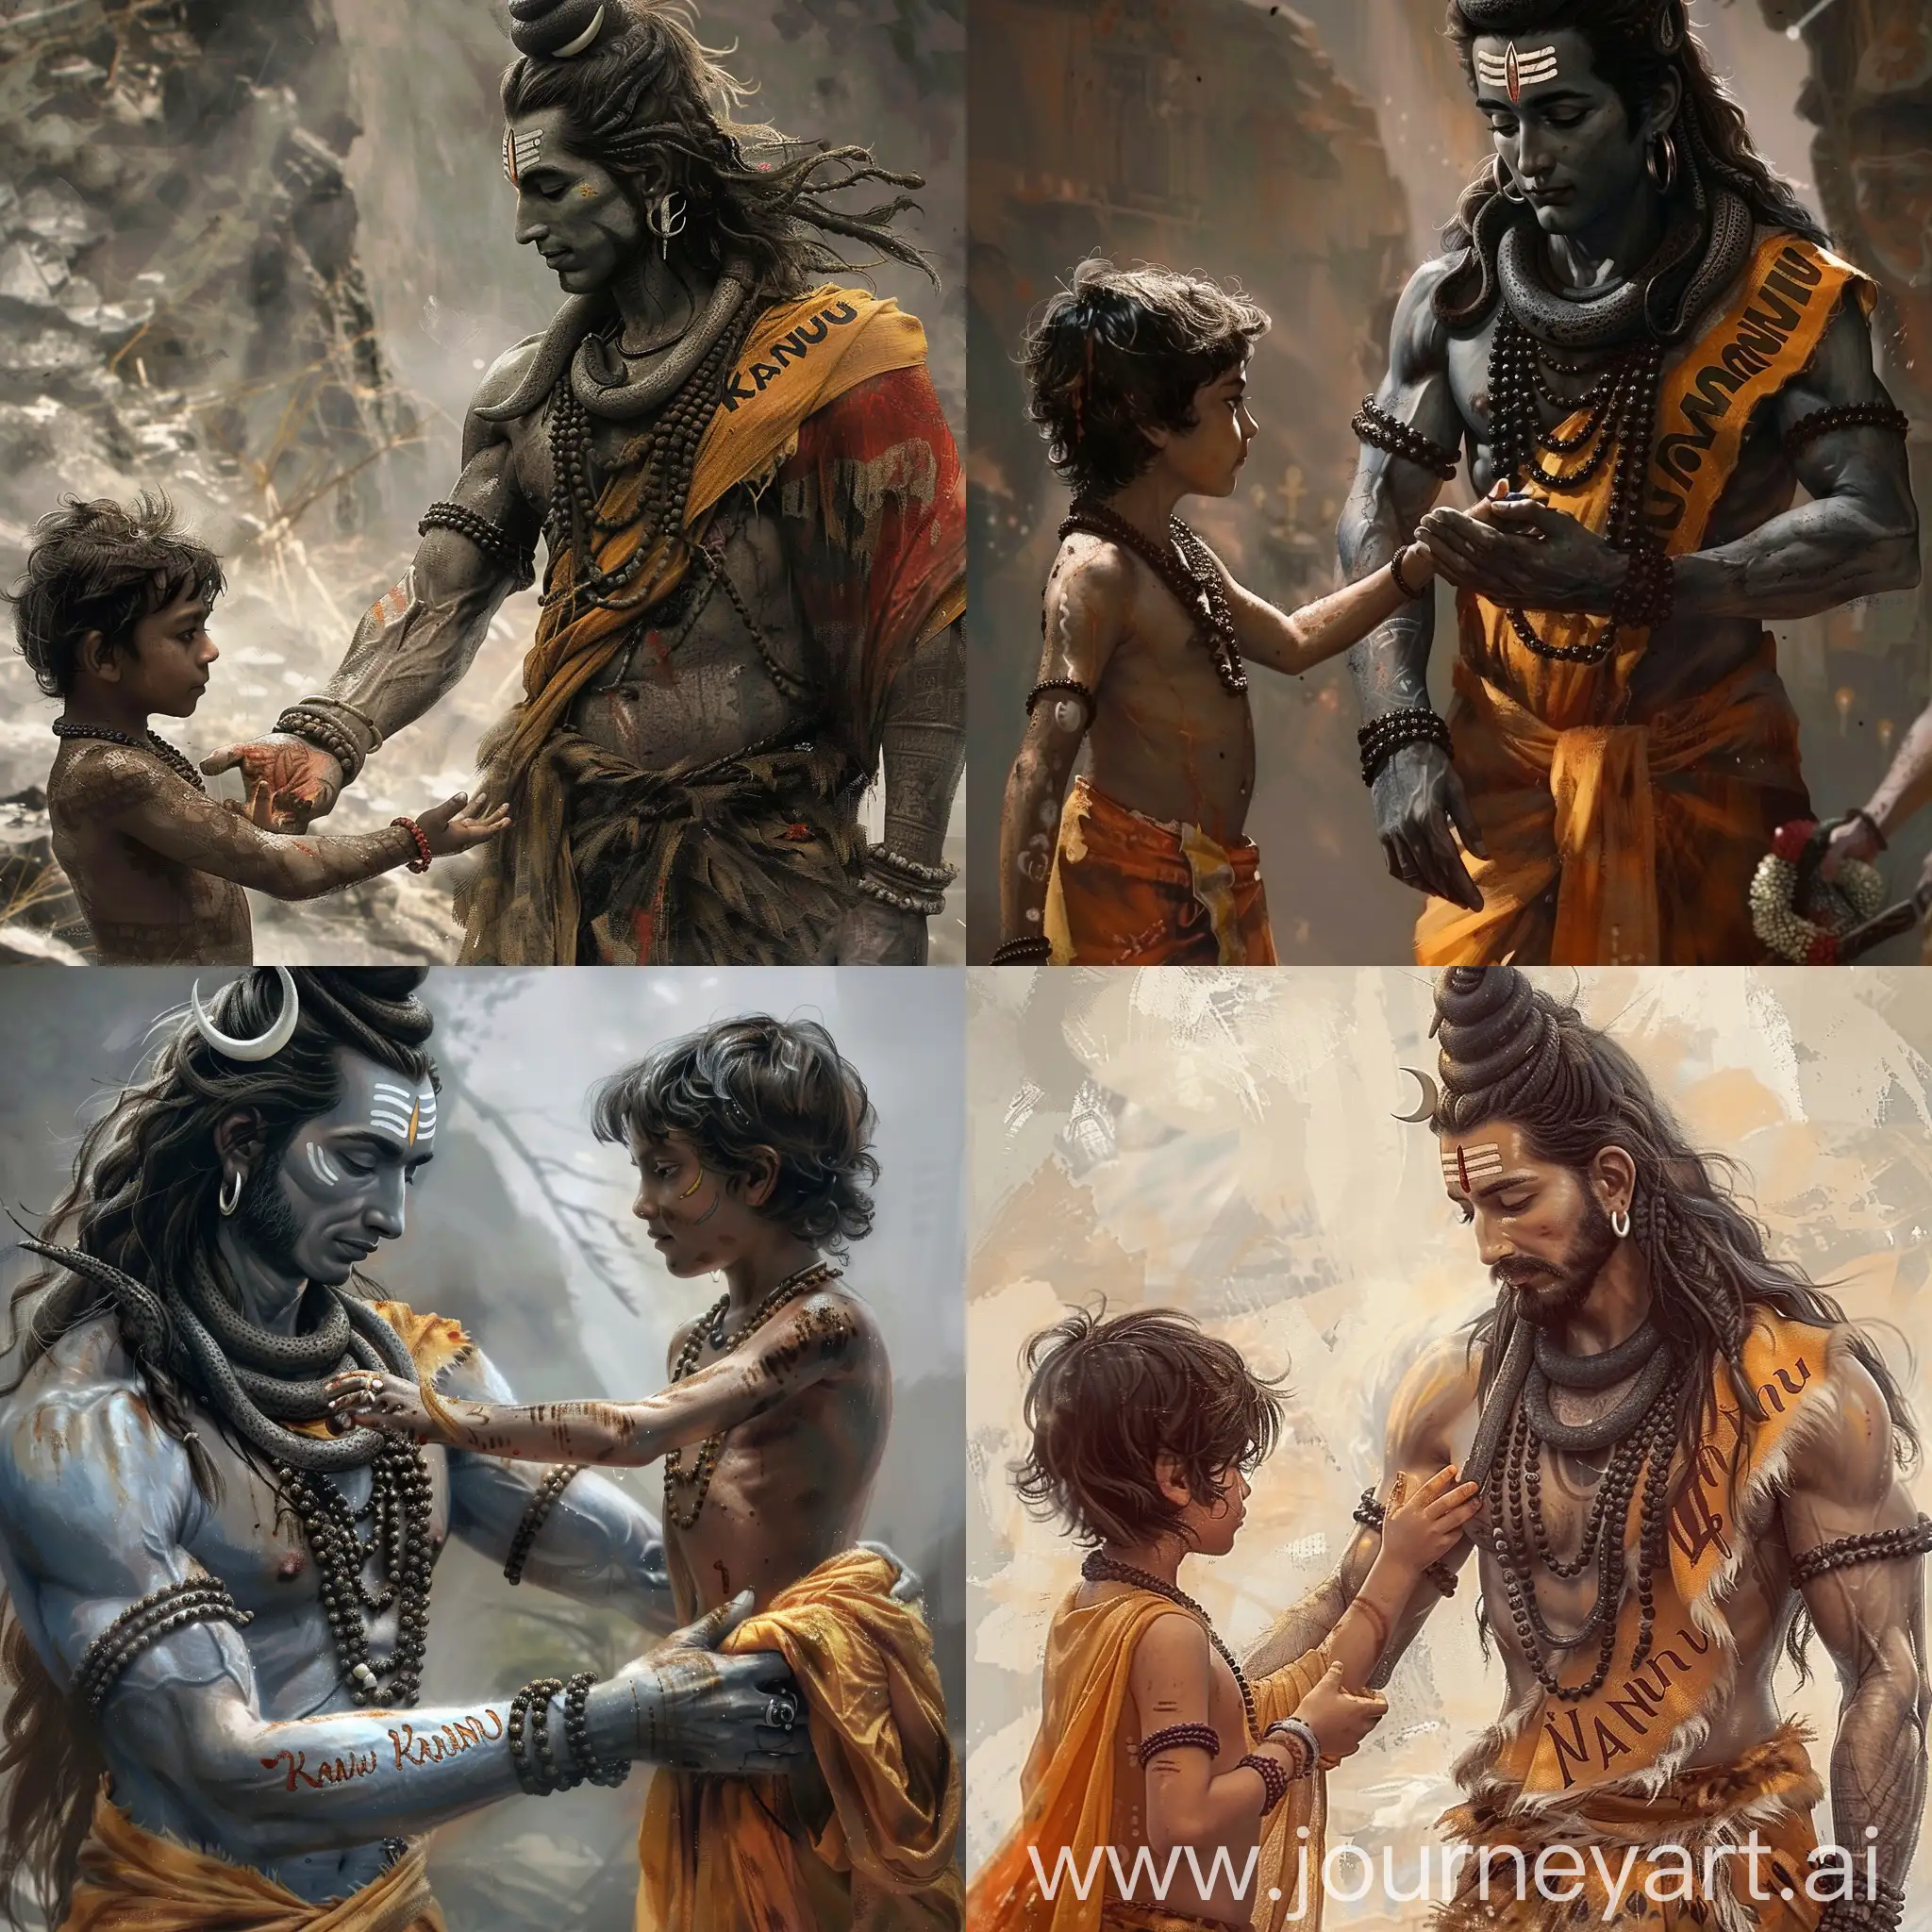 Lord Shiva held the hand of a boy who was wearing saffron colored cloth with Kannu written on it.